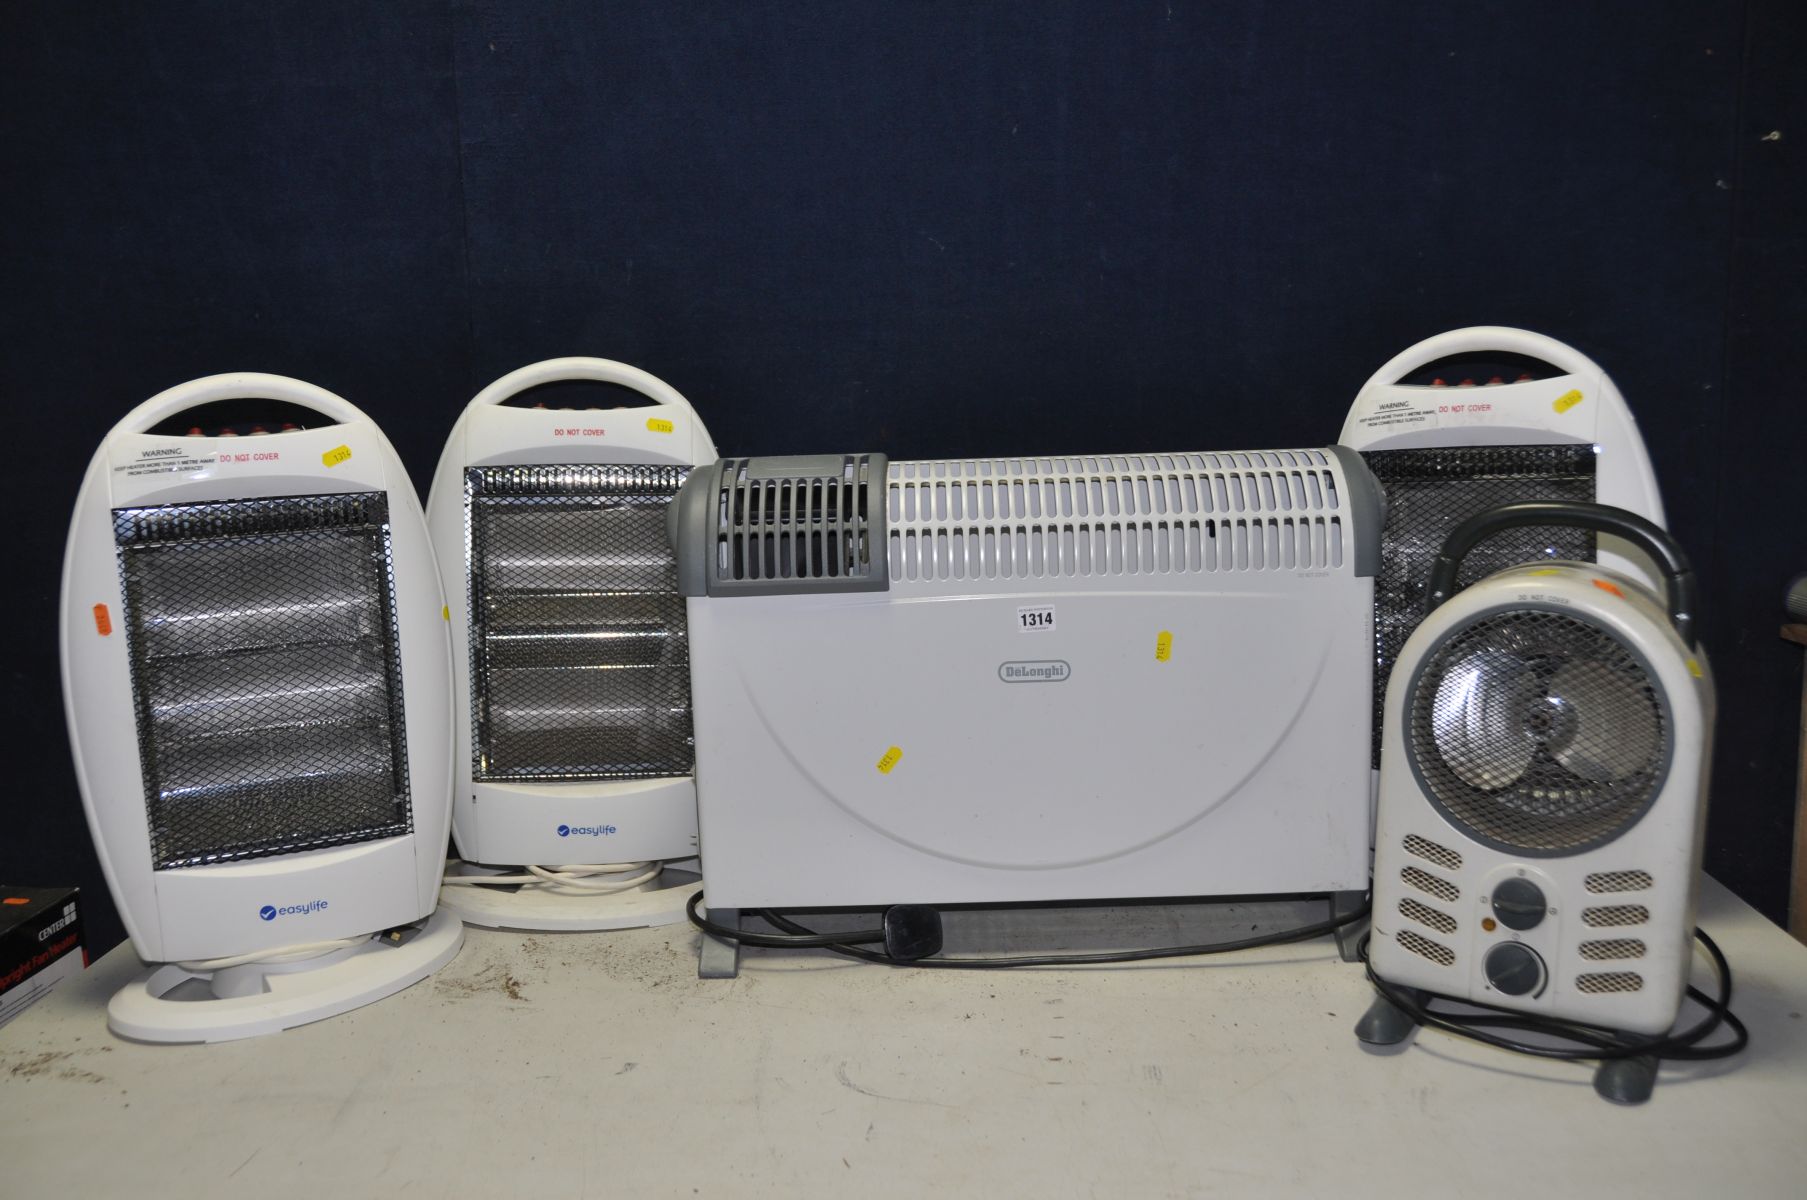 A SELECTION OF HEATERS comprising of three Easylife halogen heaters, two Hotwave blow heaters and